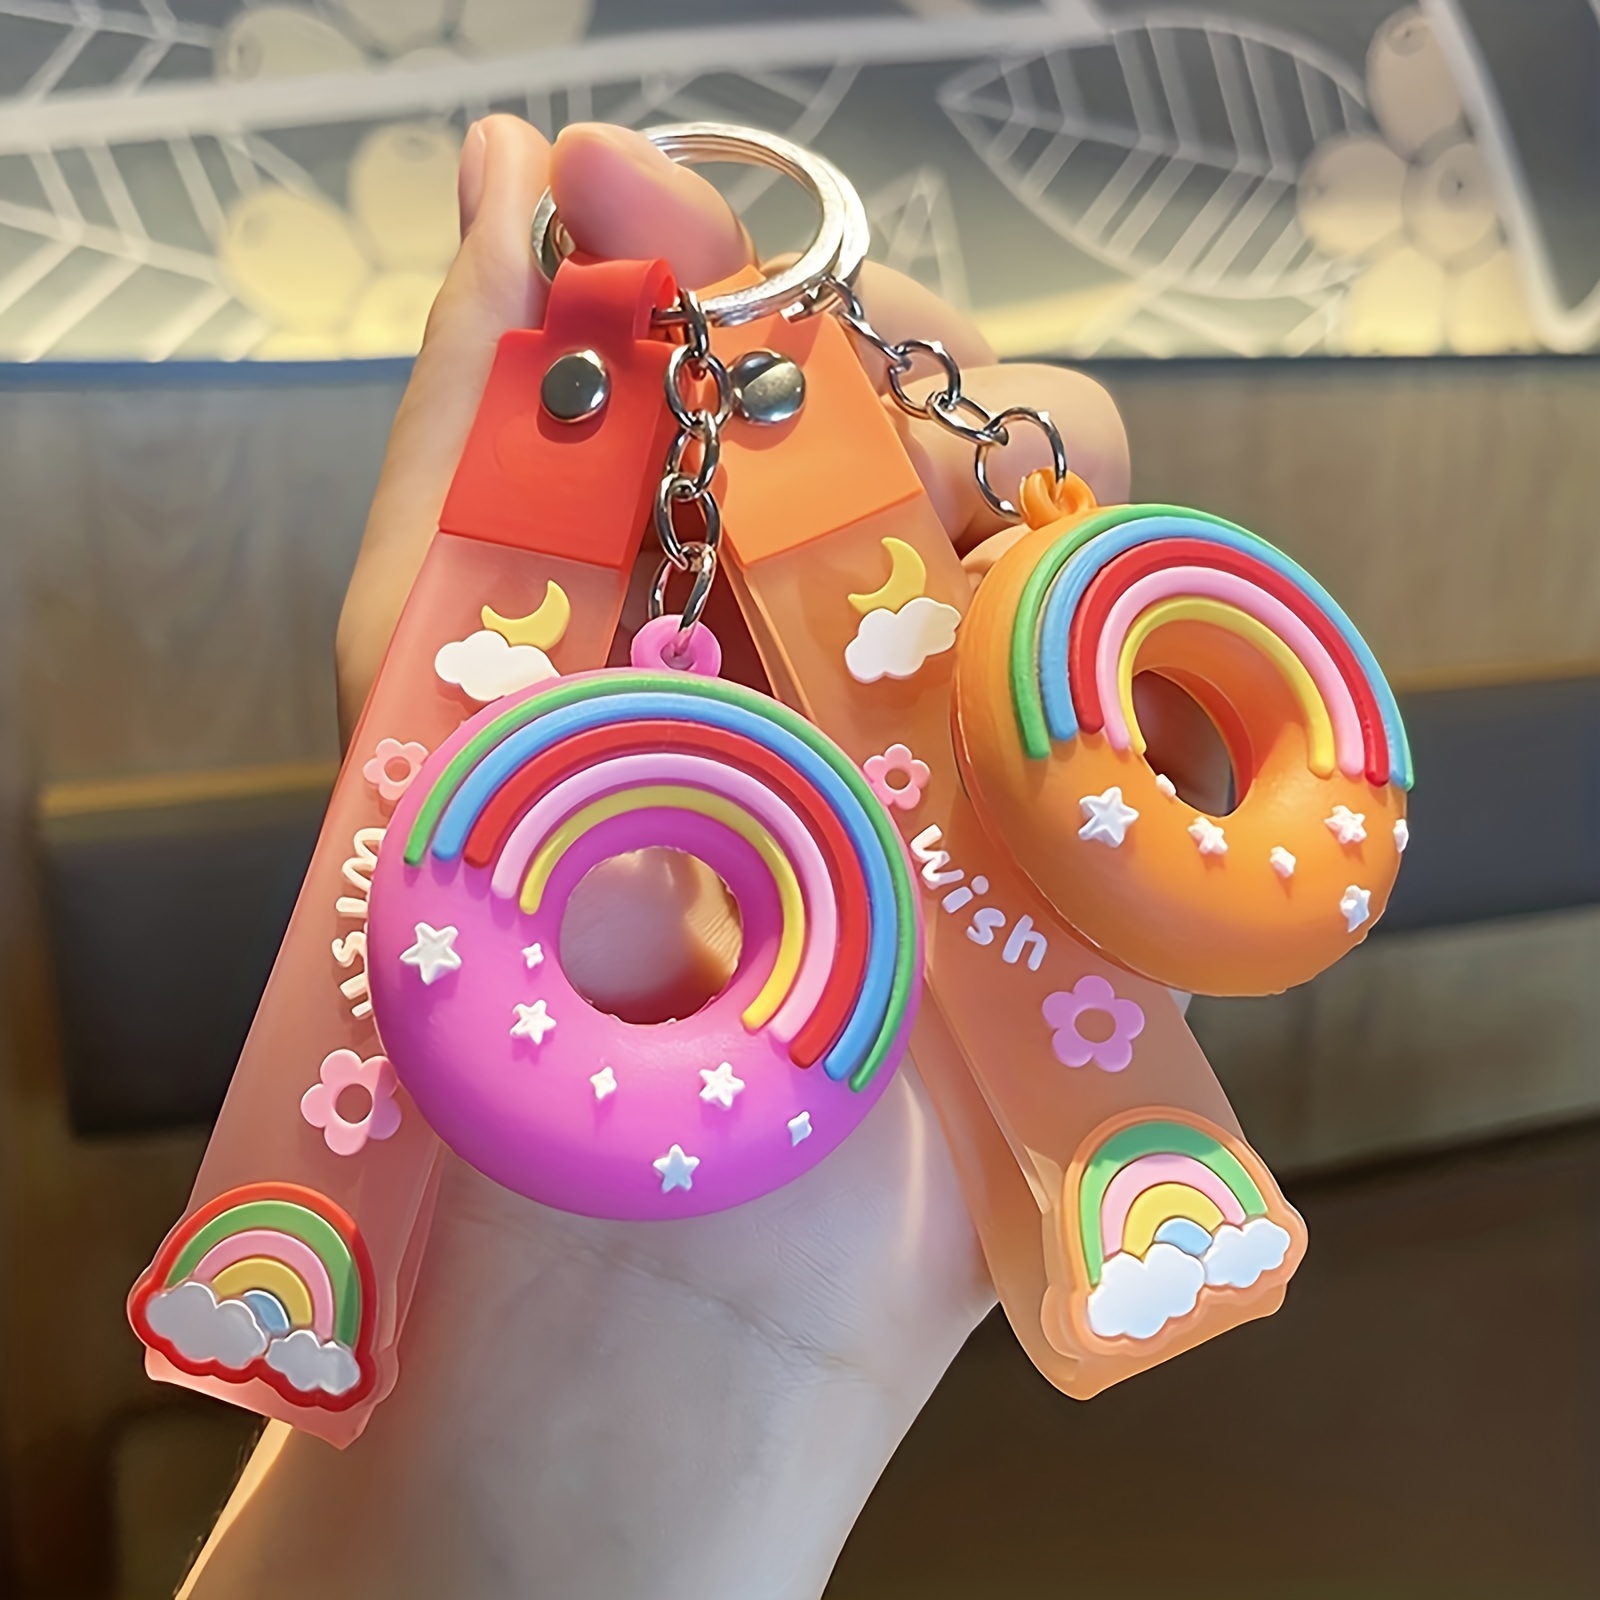 

1pc Rainbow Donut Keychain Cute Candy Color Silicone Wristlet Key Chain Ring Bag Backpack Charm Car Hanging Pendant Women Daily Use Gift